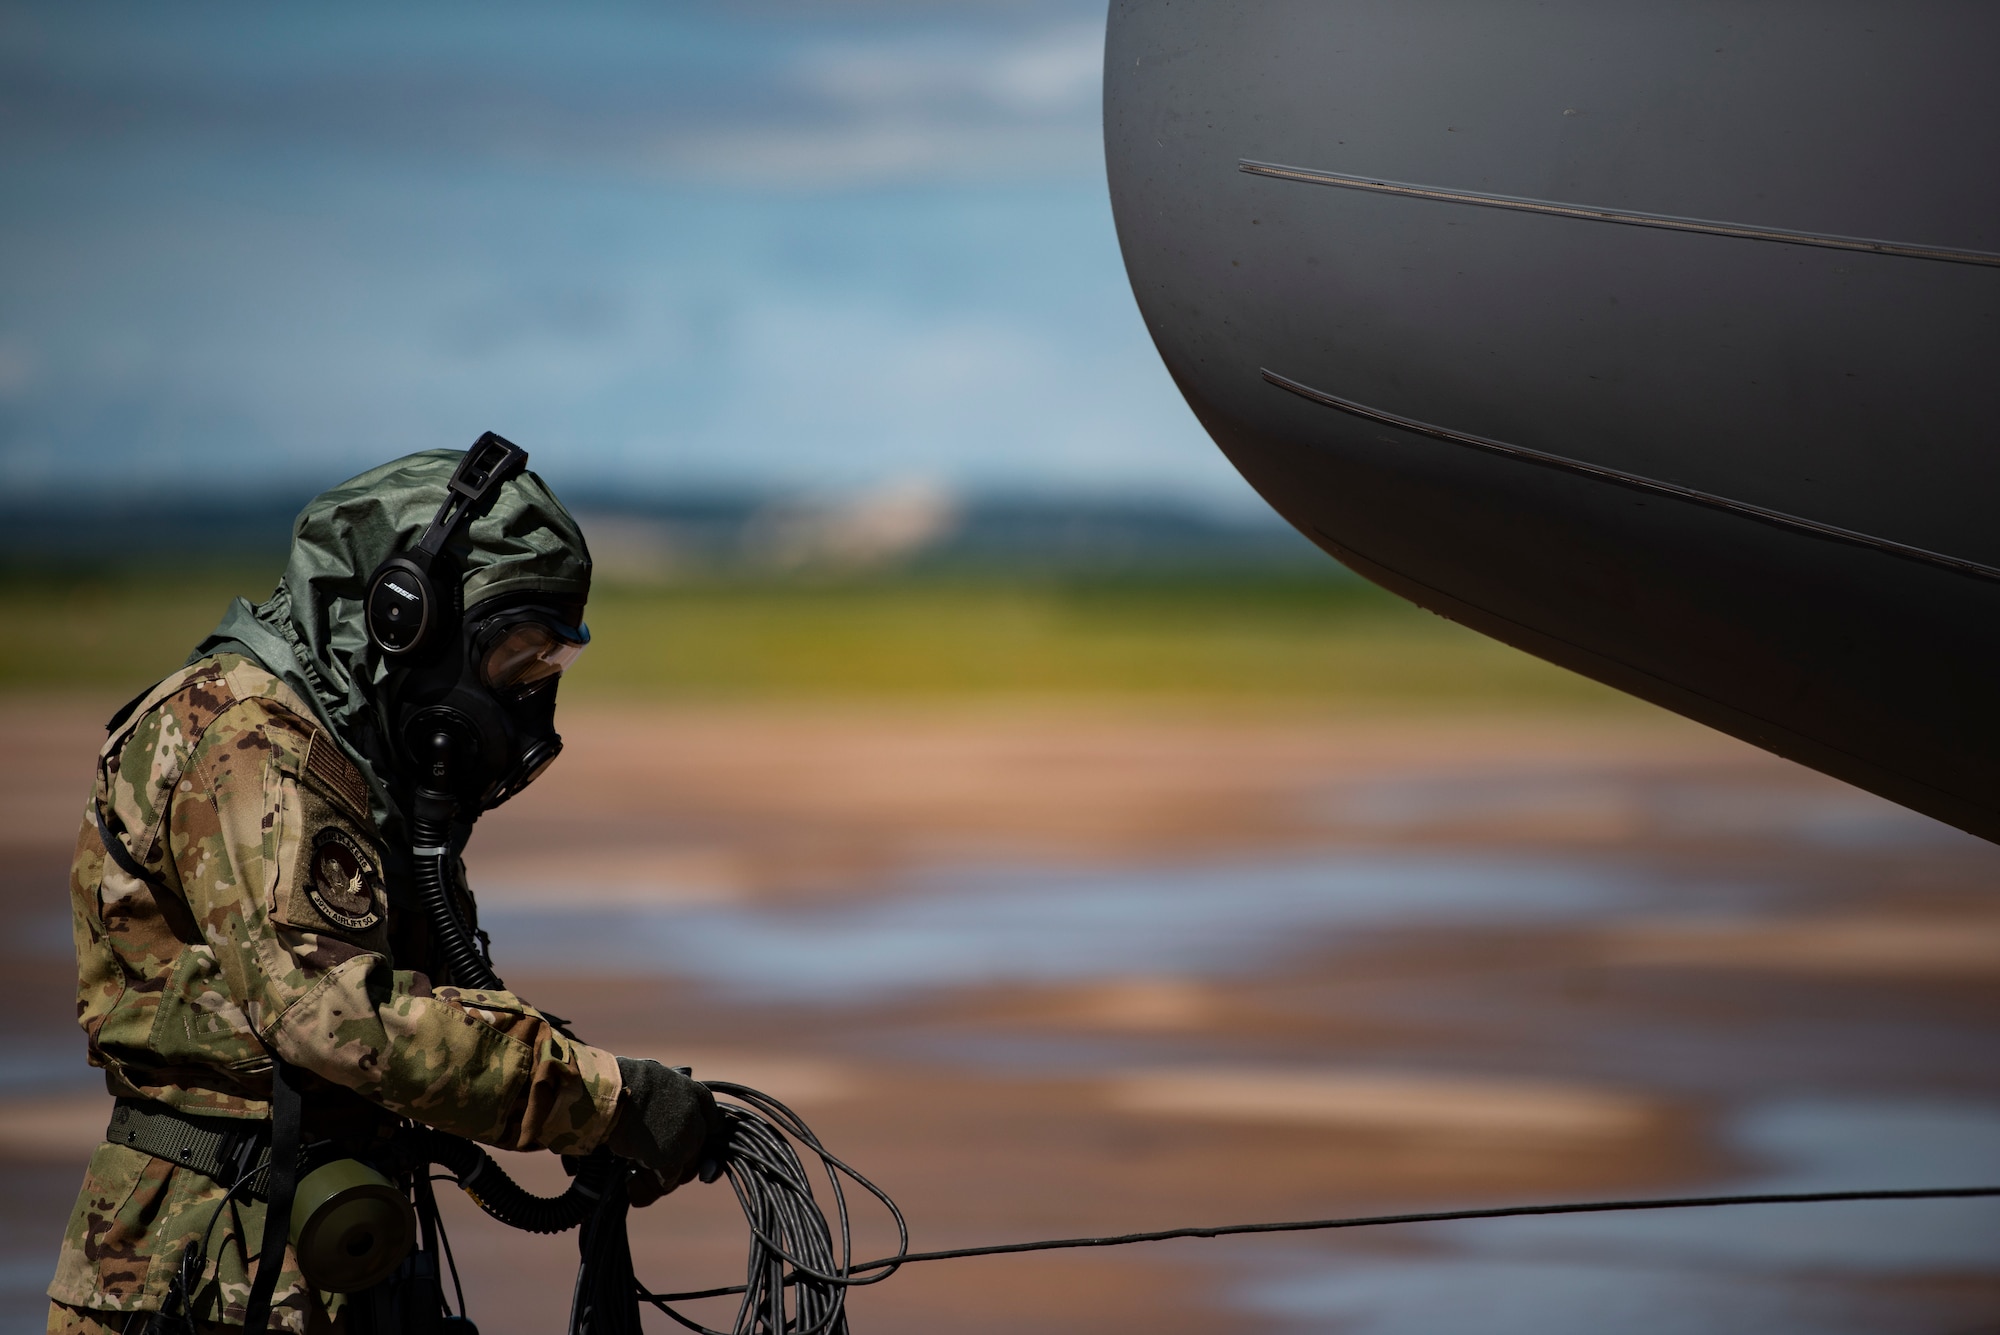 Senior Airmen Noah Isom, 39th Airlift Squadron loadmaster, conducts preflight checks on a C-130J Super Hercules while weaning the new Two-Piece Undergarment universal integrative ensemble chemical protective suit at Dyess Air Force Base, Texas, June 2, 2021. Research and development of new protective equipment allows the U.S. Air Force to find practical ways to combine functionality, operability and comfortability. (U.S. Air Force photo by Airman 1st Class Colin Hollowell)